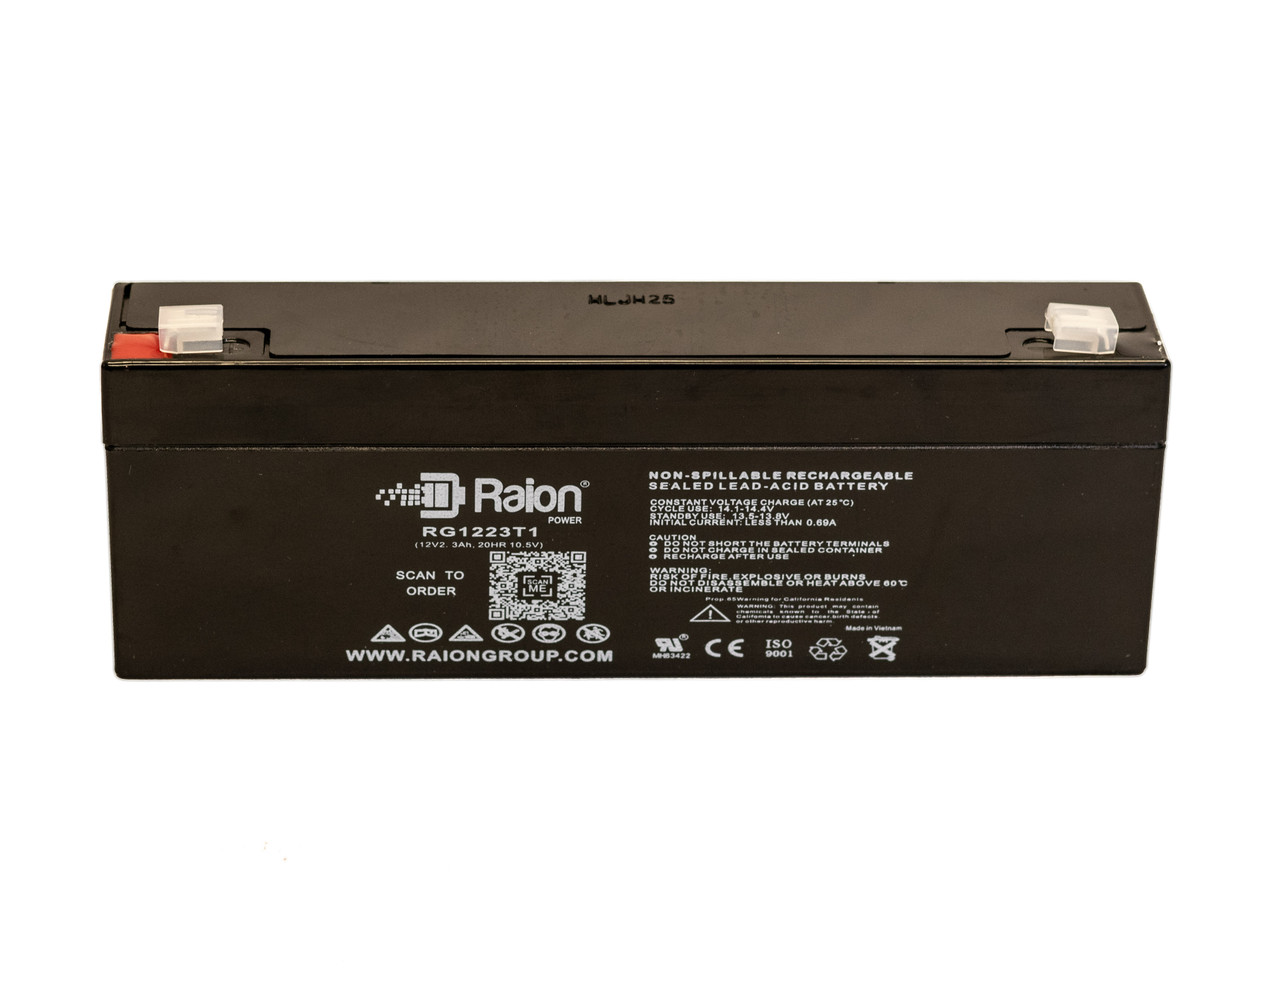 Raion Power 12V 2.3Ah SLA Battery With T1 Terminals For Criticare Systems 602 13